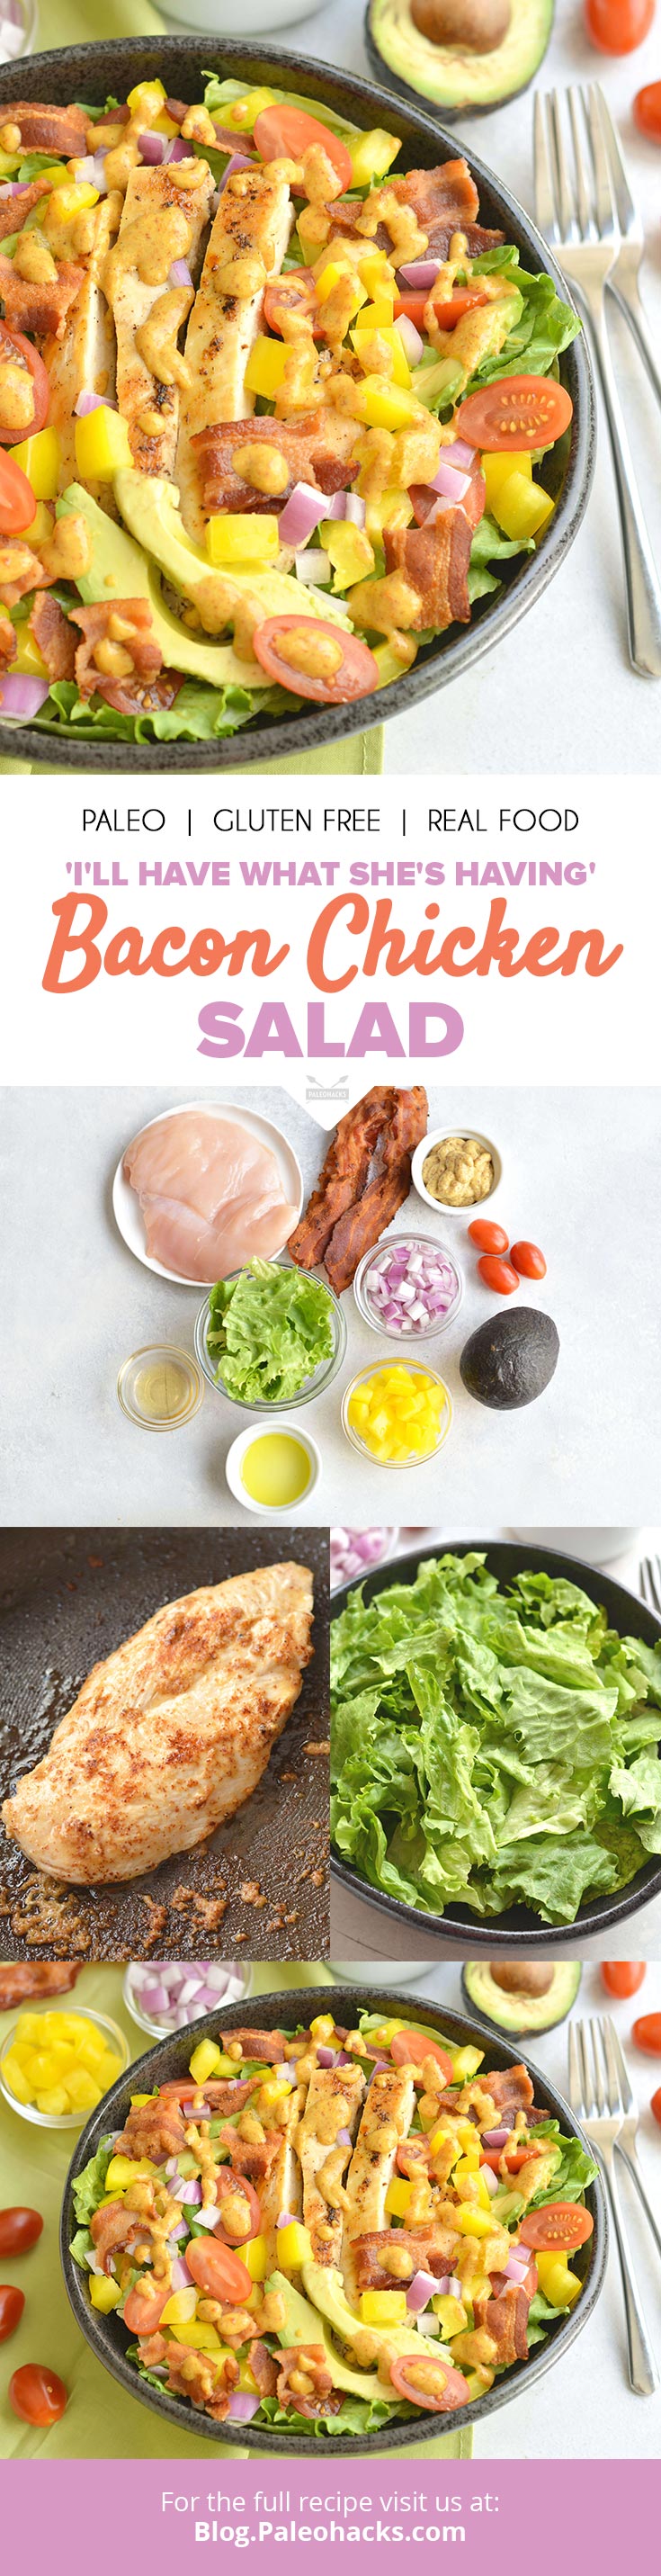 Take your salad up a notch with this epic bacon chicken salad loaded with a rainbow of veggies and topped with an easy 4-ingredient dressing.